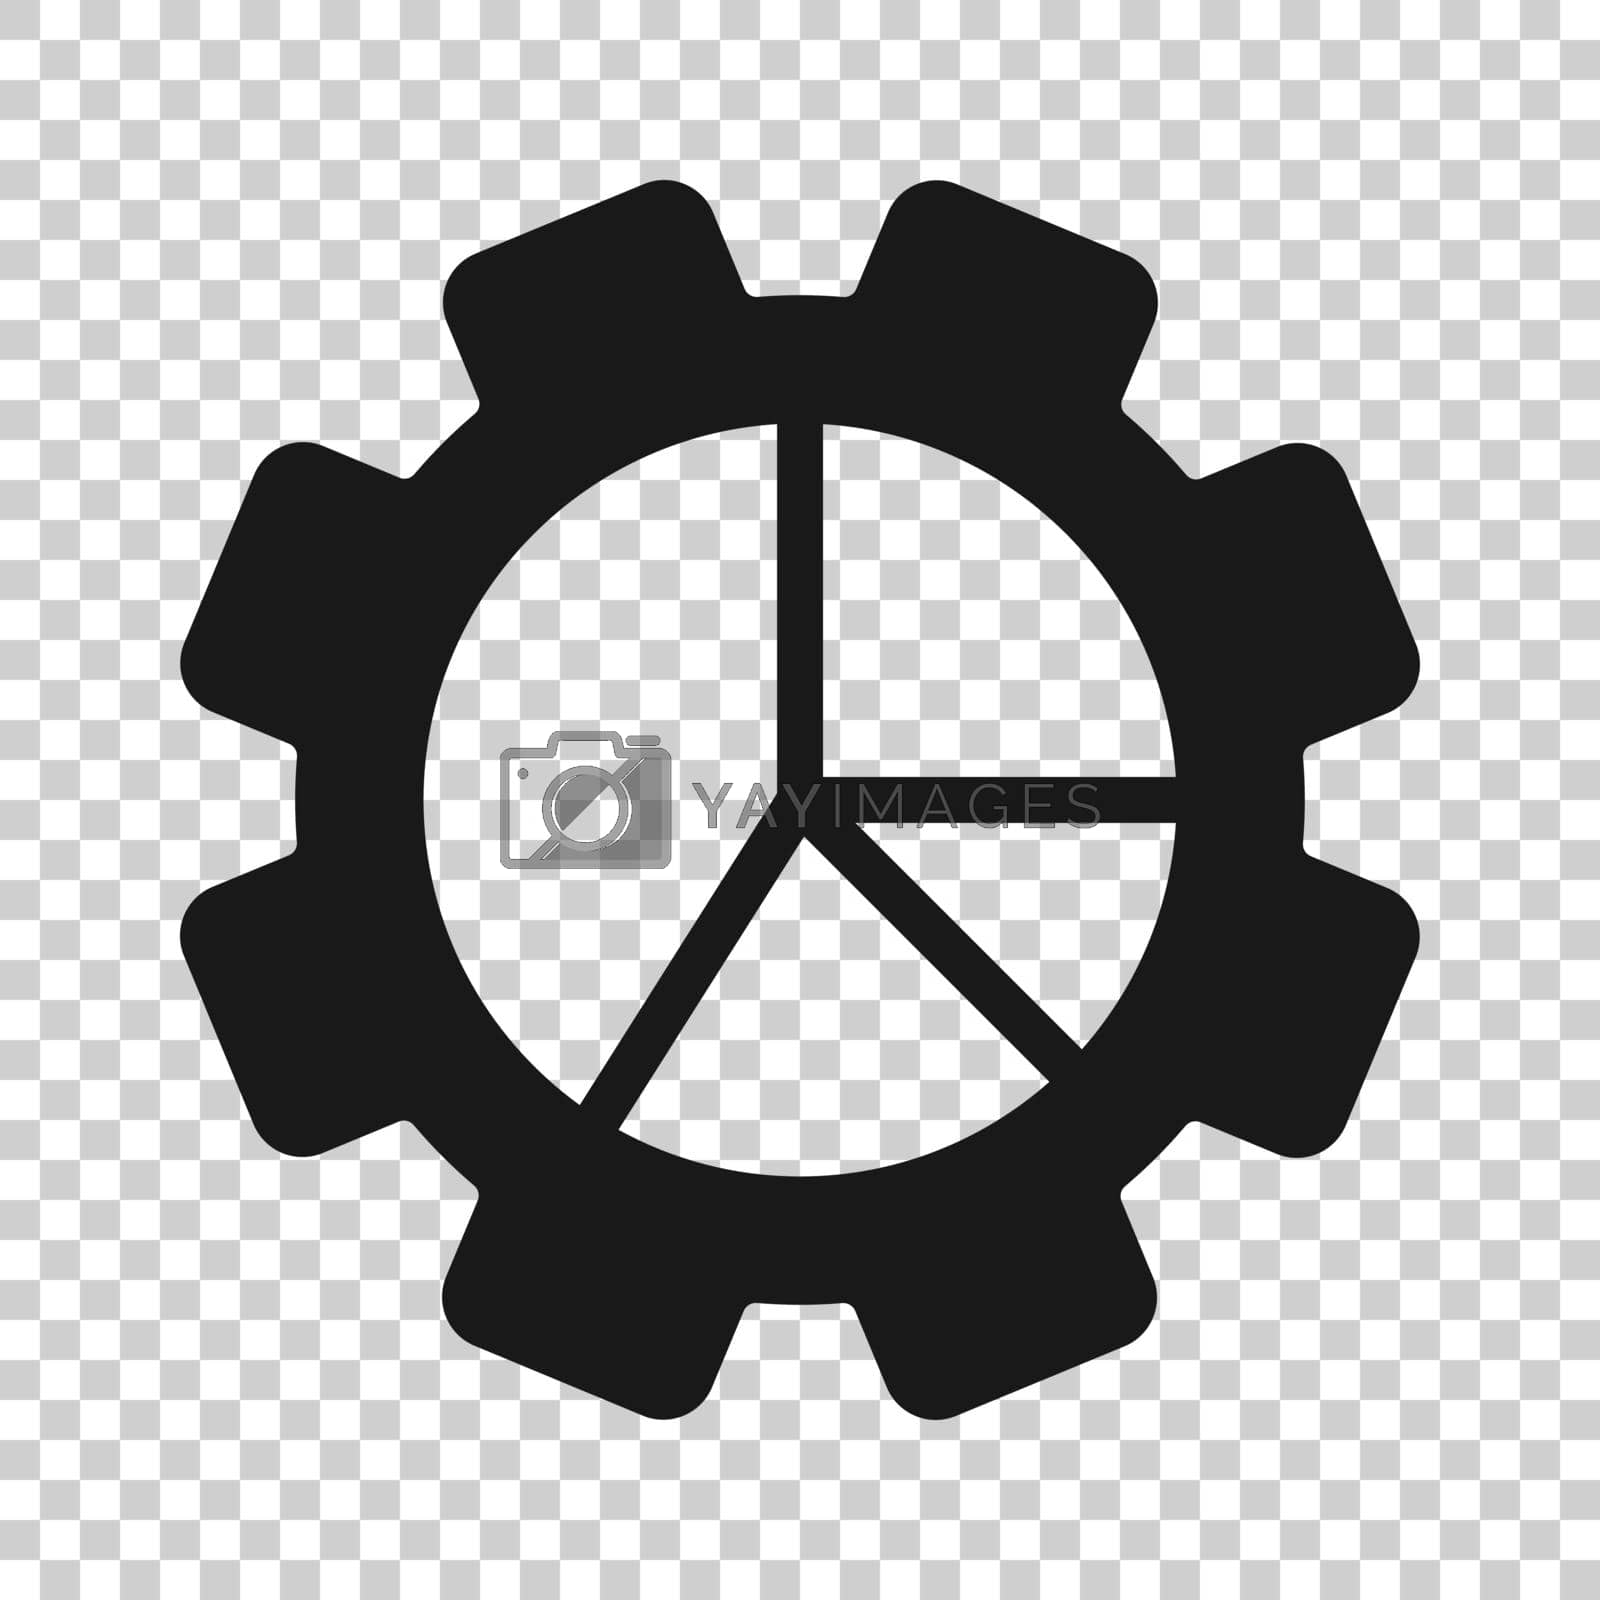 Royalty free image of Workflow chart icon in flat style. Gear with diagram vector illustration on white isolated background. Process organization business concept. by LysenkoA